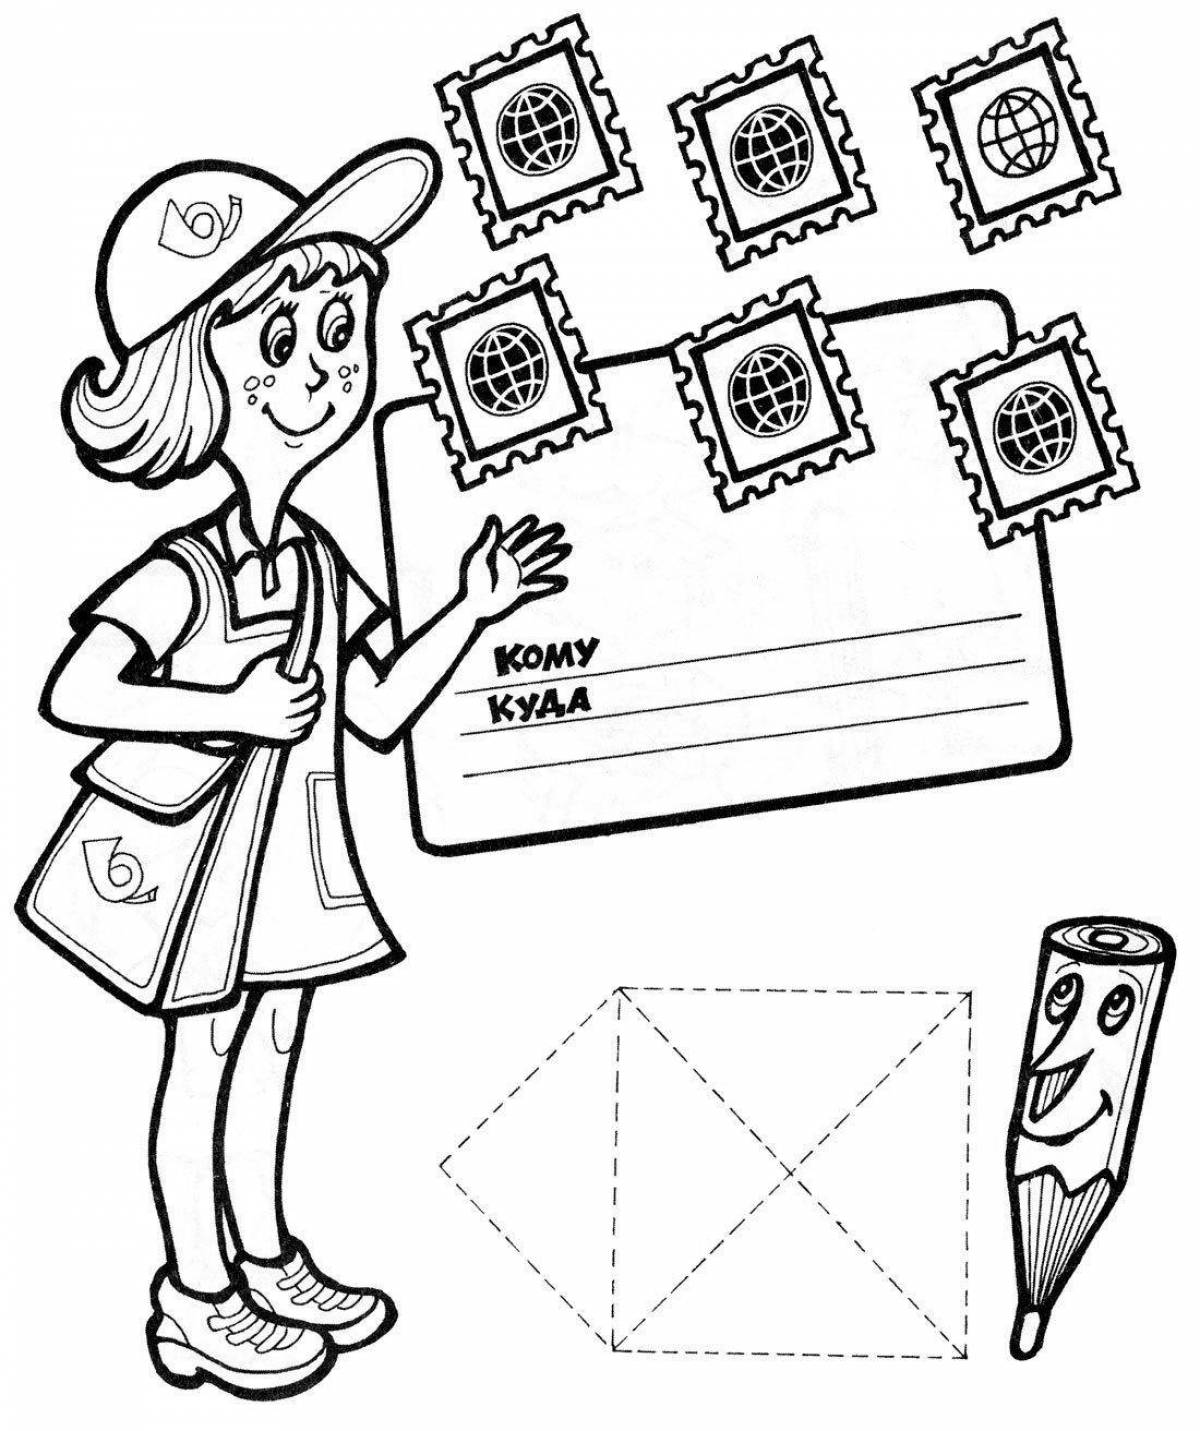 Delightful mail coloring page